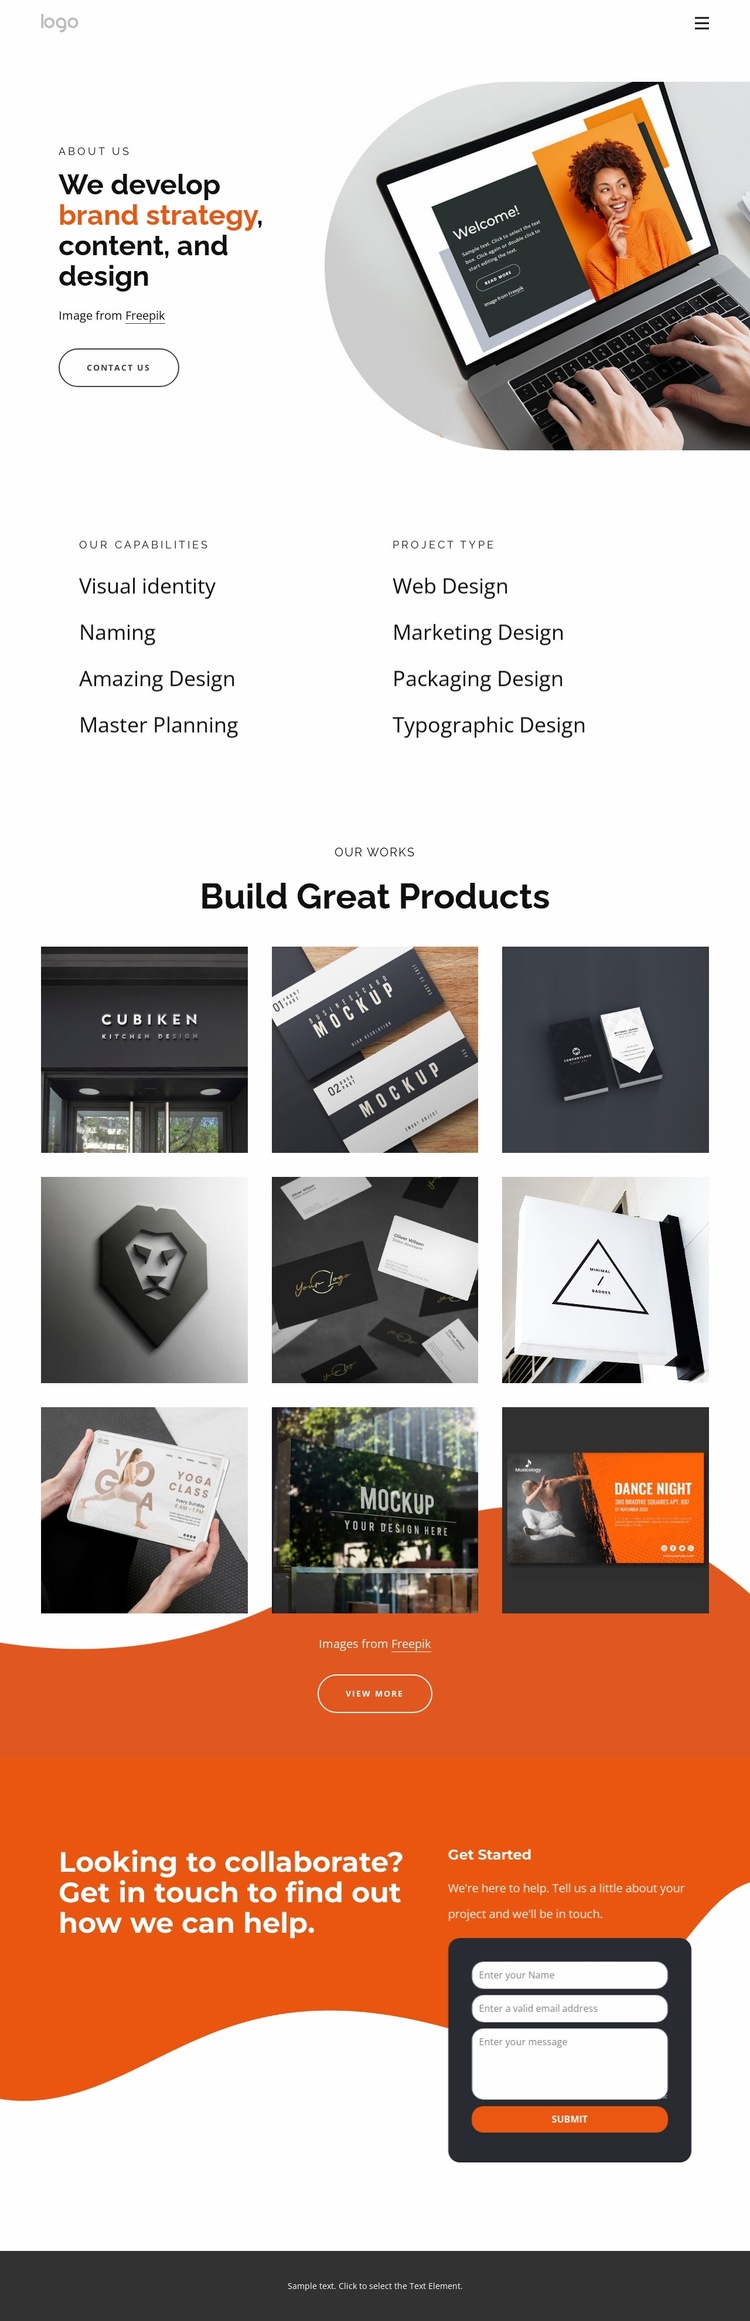 We create thoughtful experiences for humans Website Builder Templates